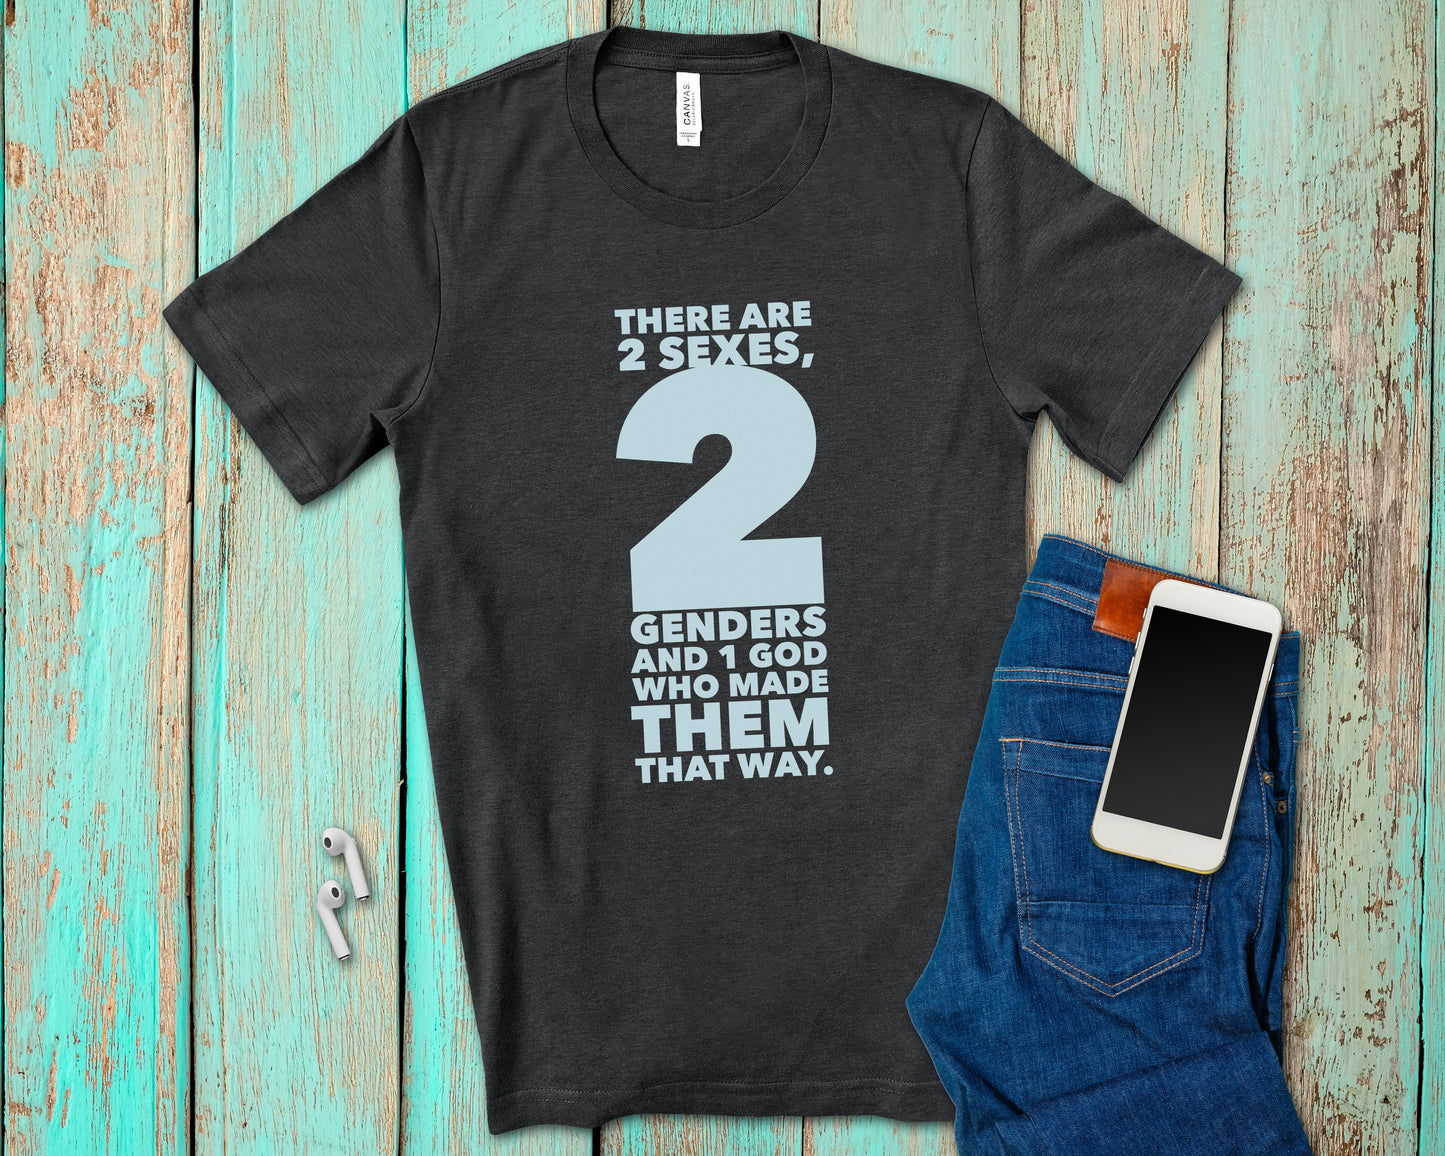 2 Genders 2 Sexes Biological fact about gender tshirt, tshirt for Christian-T-Shirts-PureDesignTees